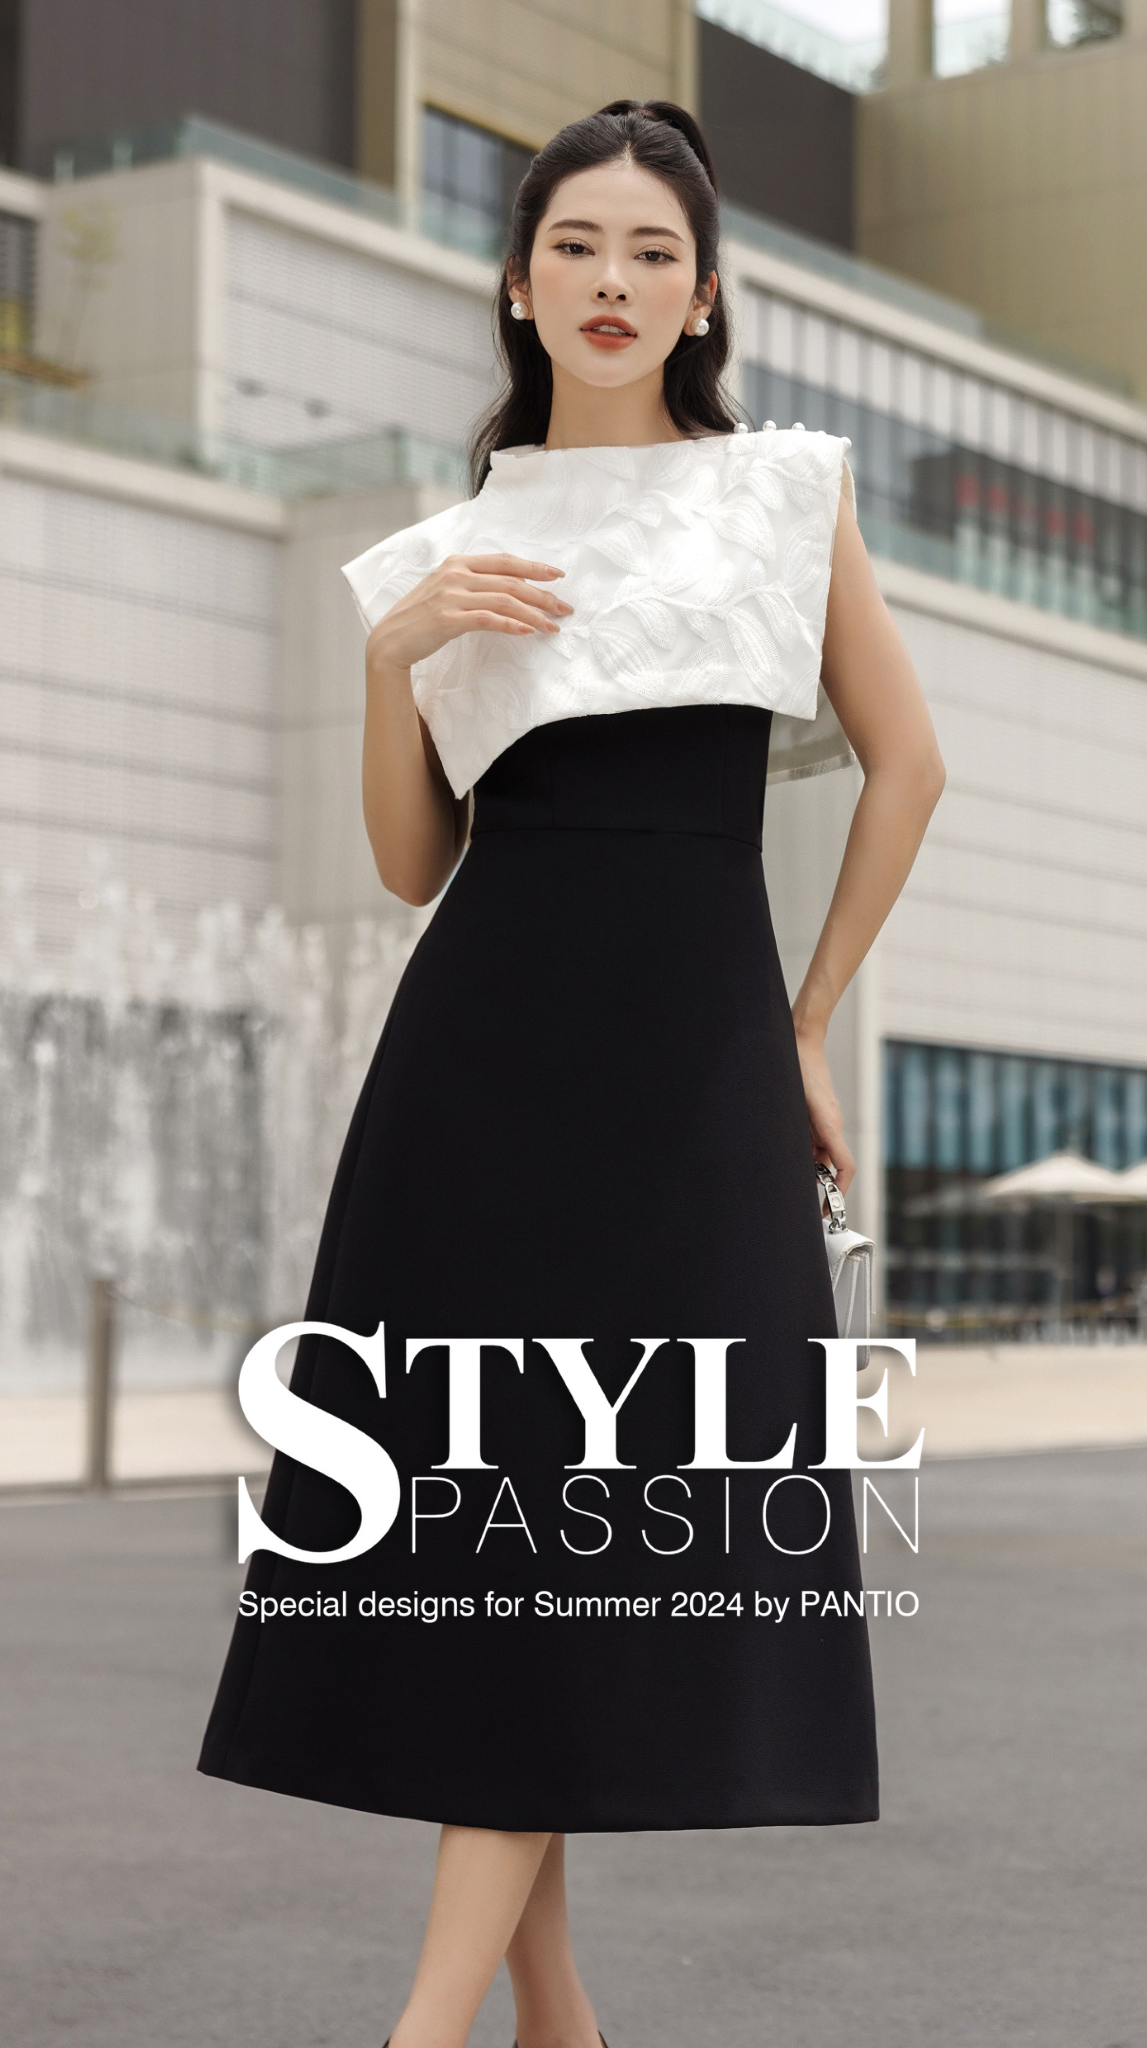 STYLE PASSION